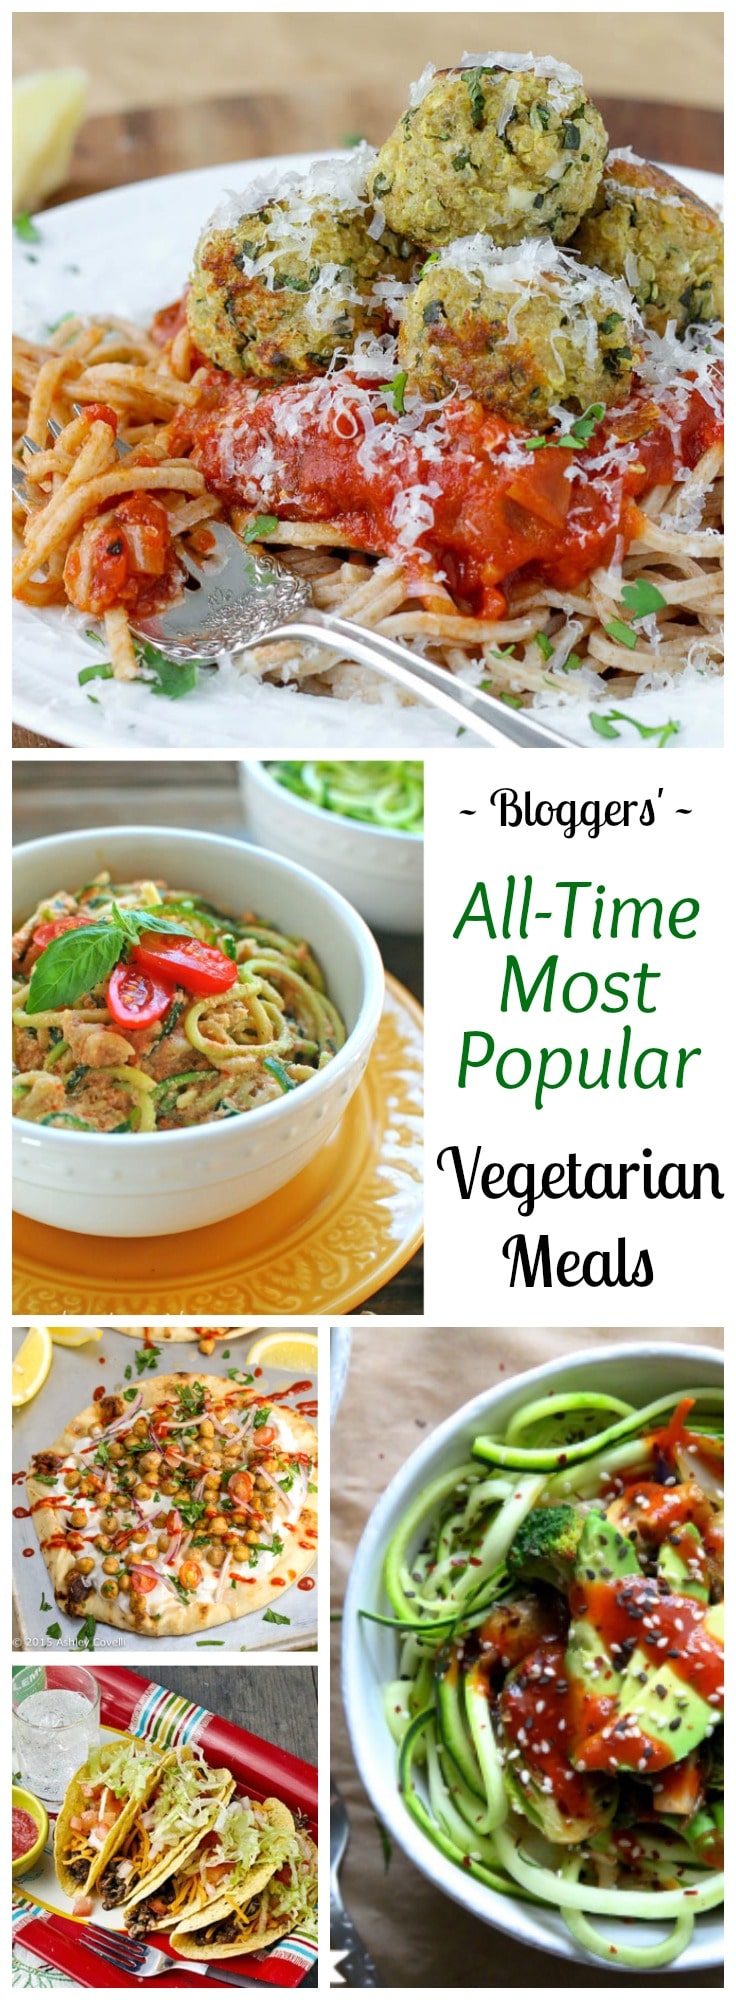 13 All-Time Best Healthy Vegetarian Meals - Two Healthy Kitchens